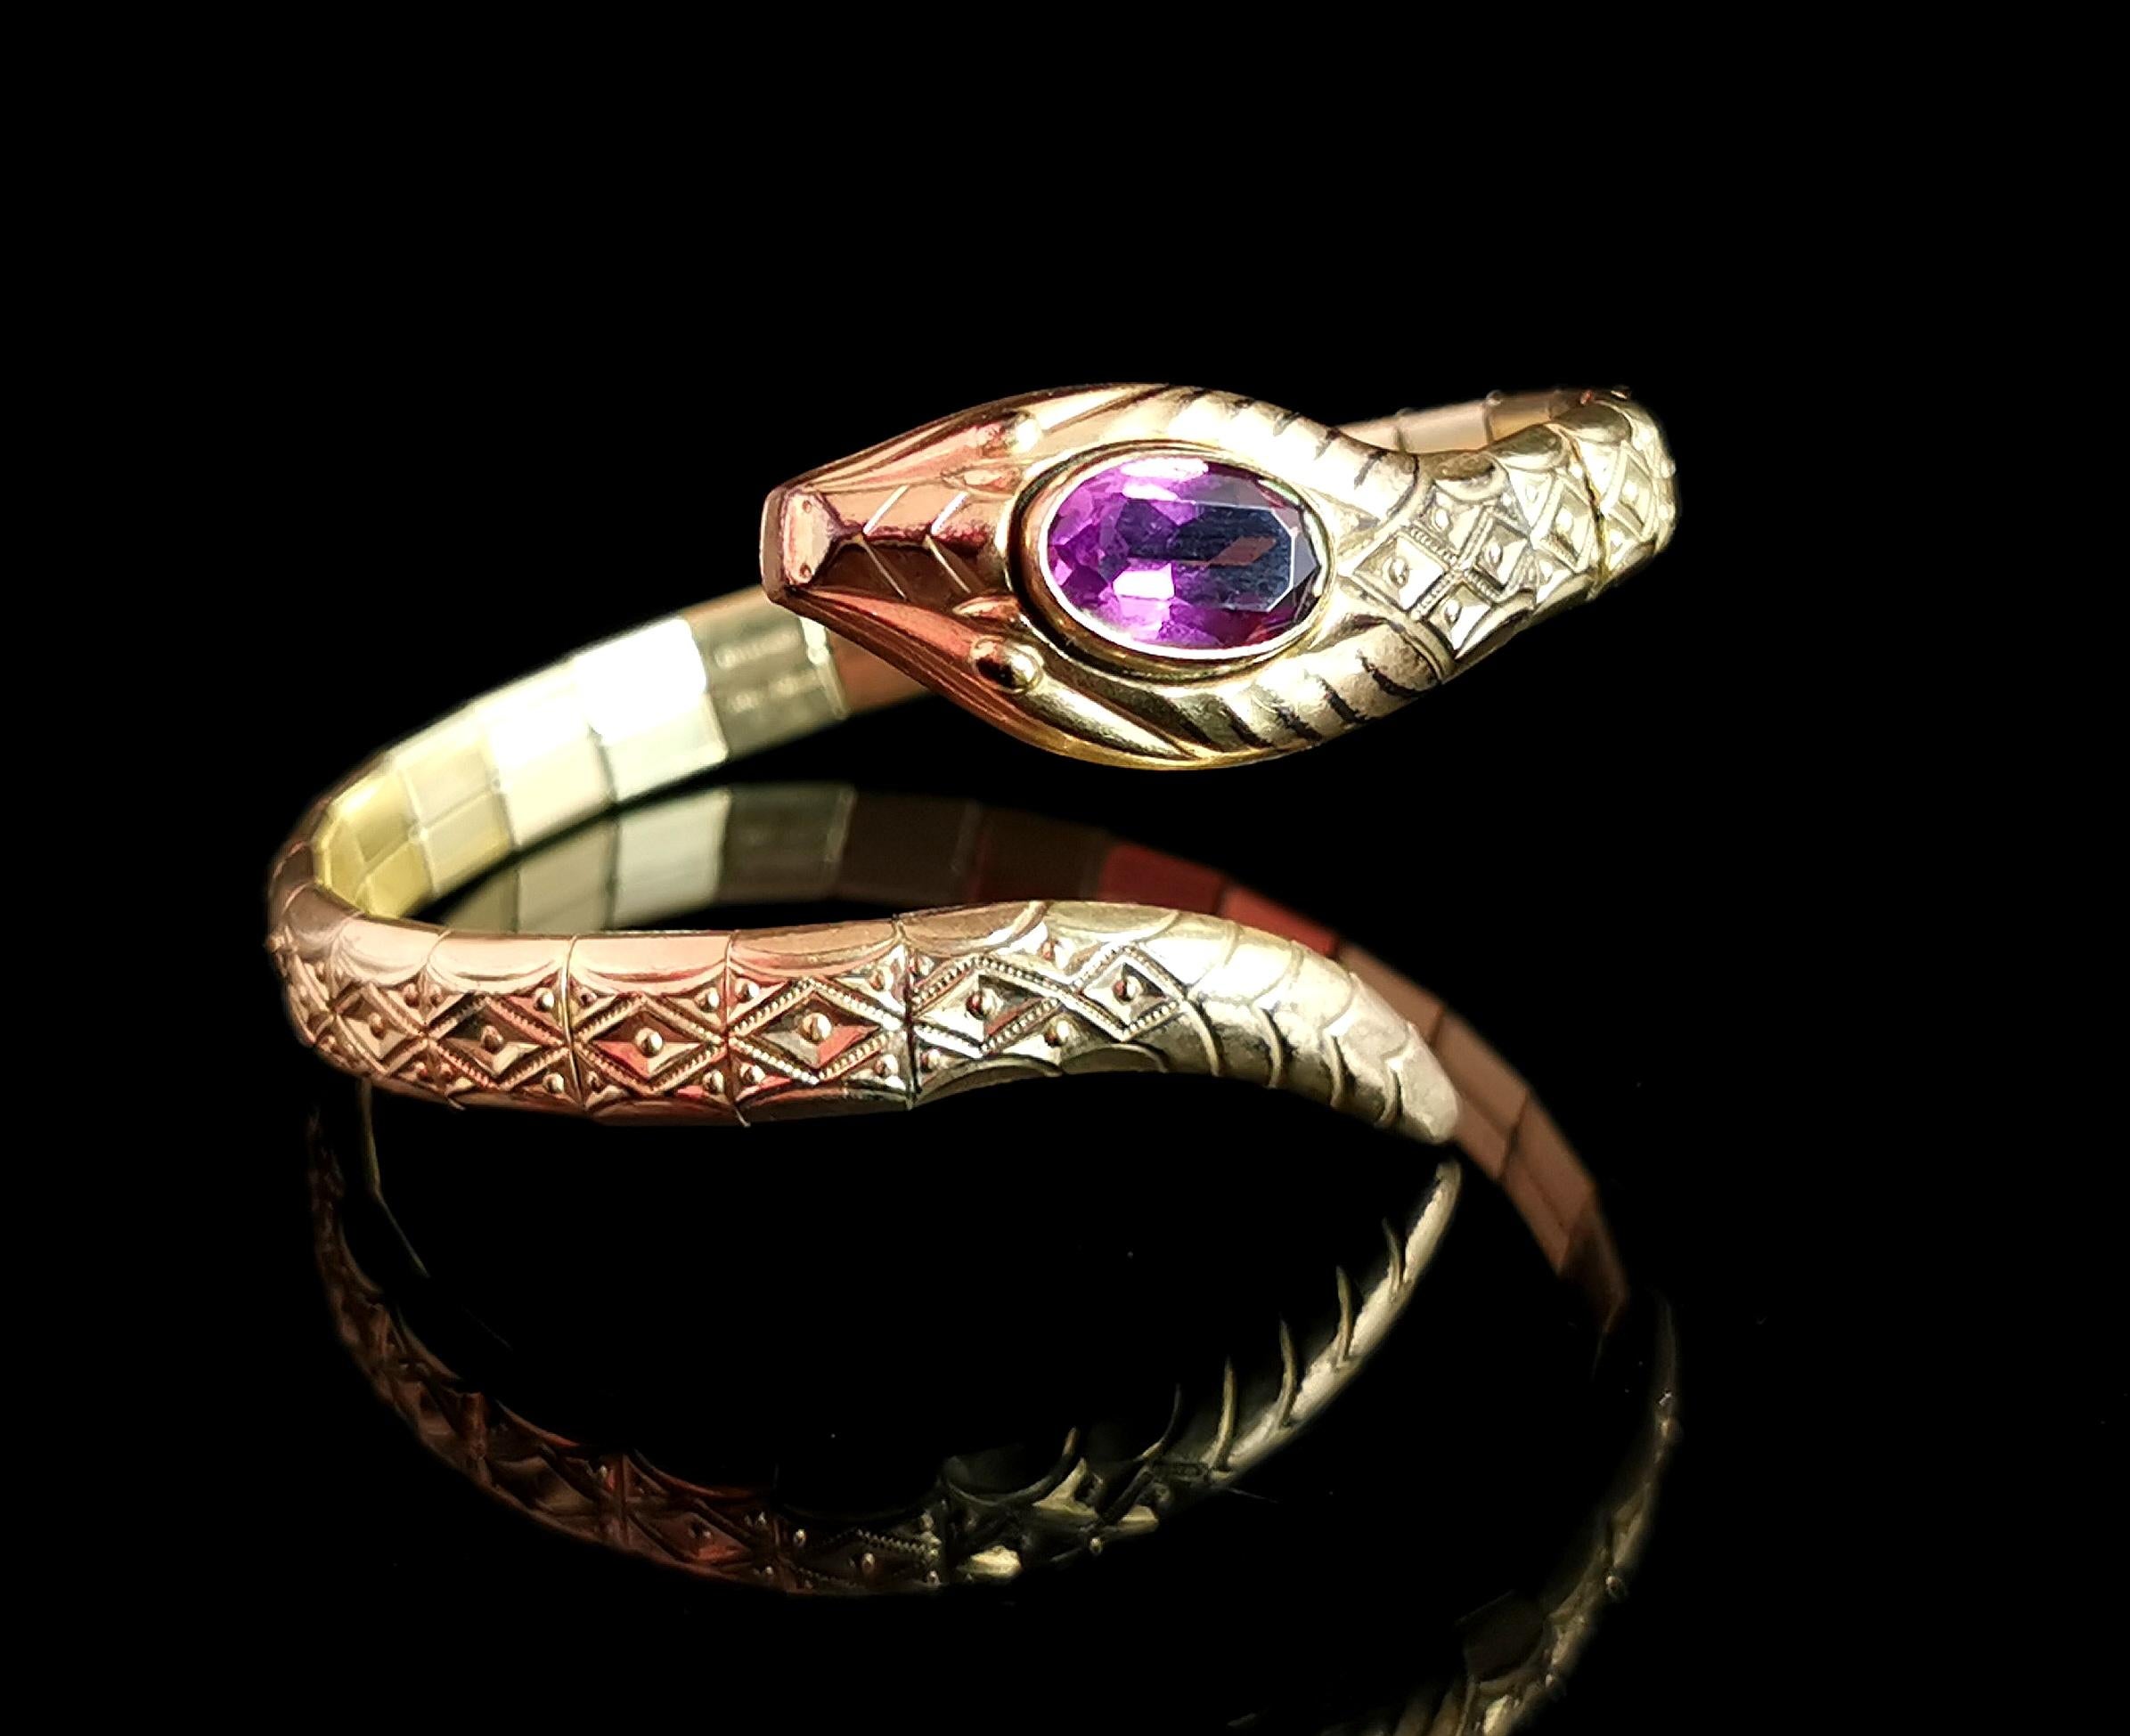 An amazing vintage, Art Deco snake bangle.

This gorgeous bangle is designed as a coiled snake in a rich rolled yellow gold with a textured and embossed body.

The head if the snake is set with a large Amethyst paste stone in rich purple.

The